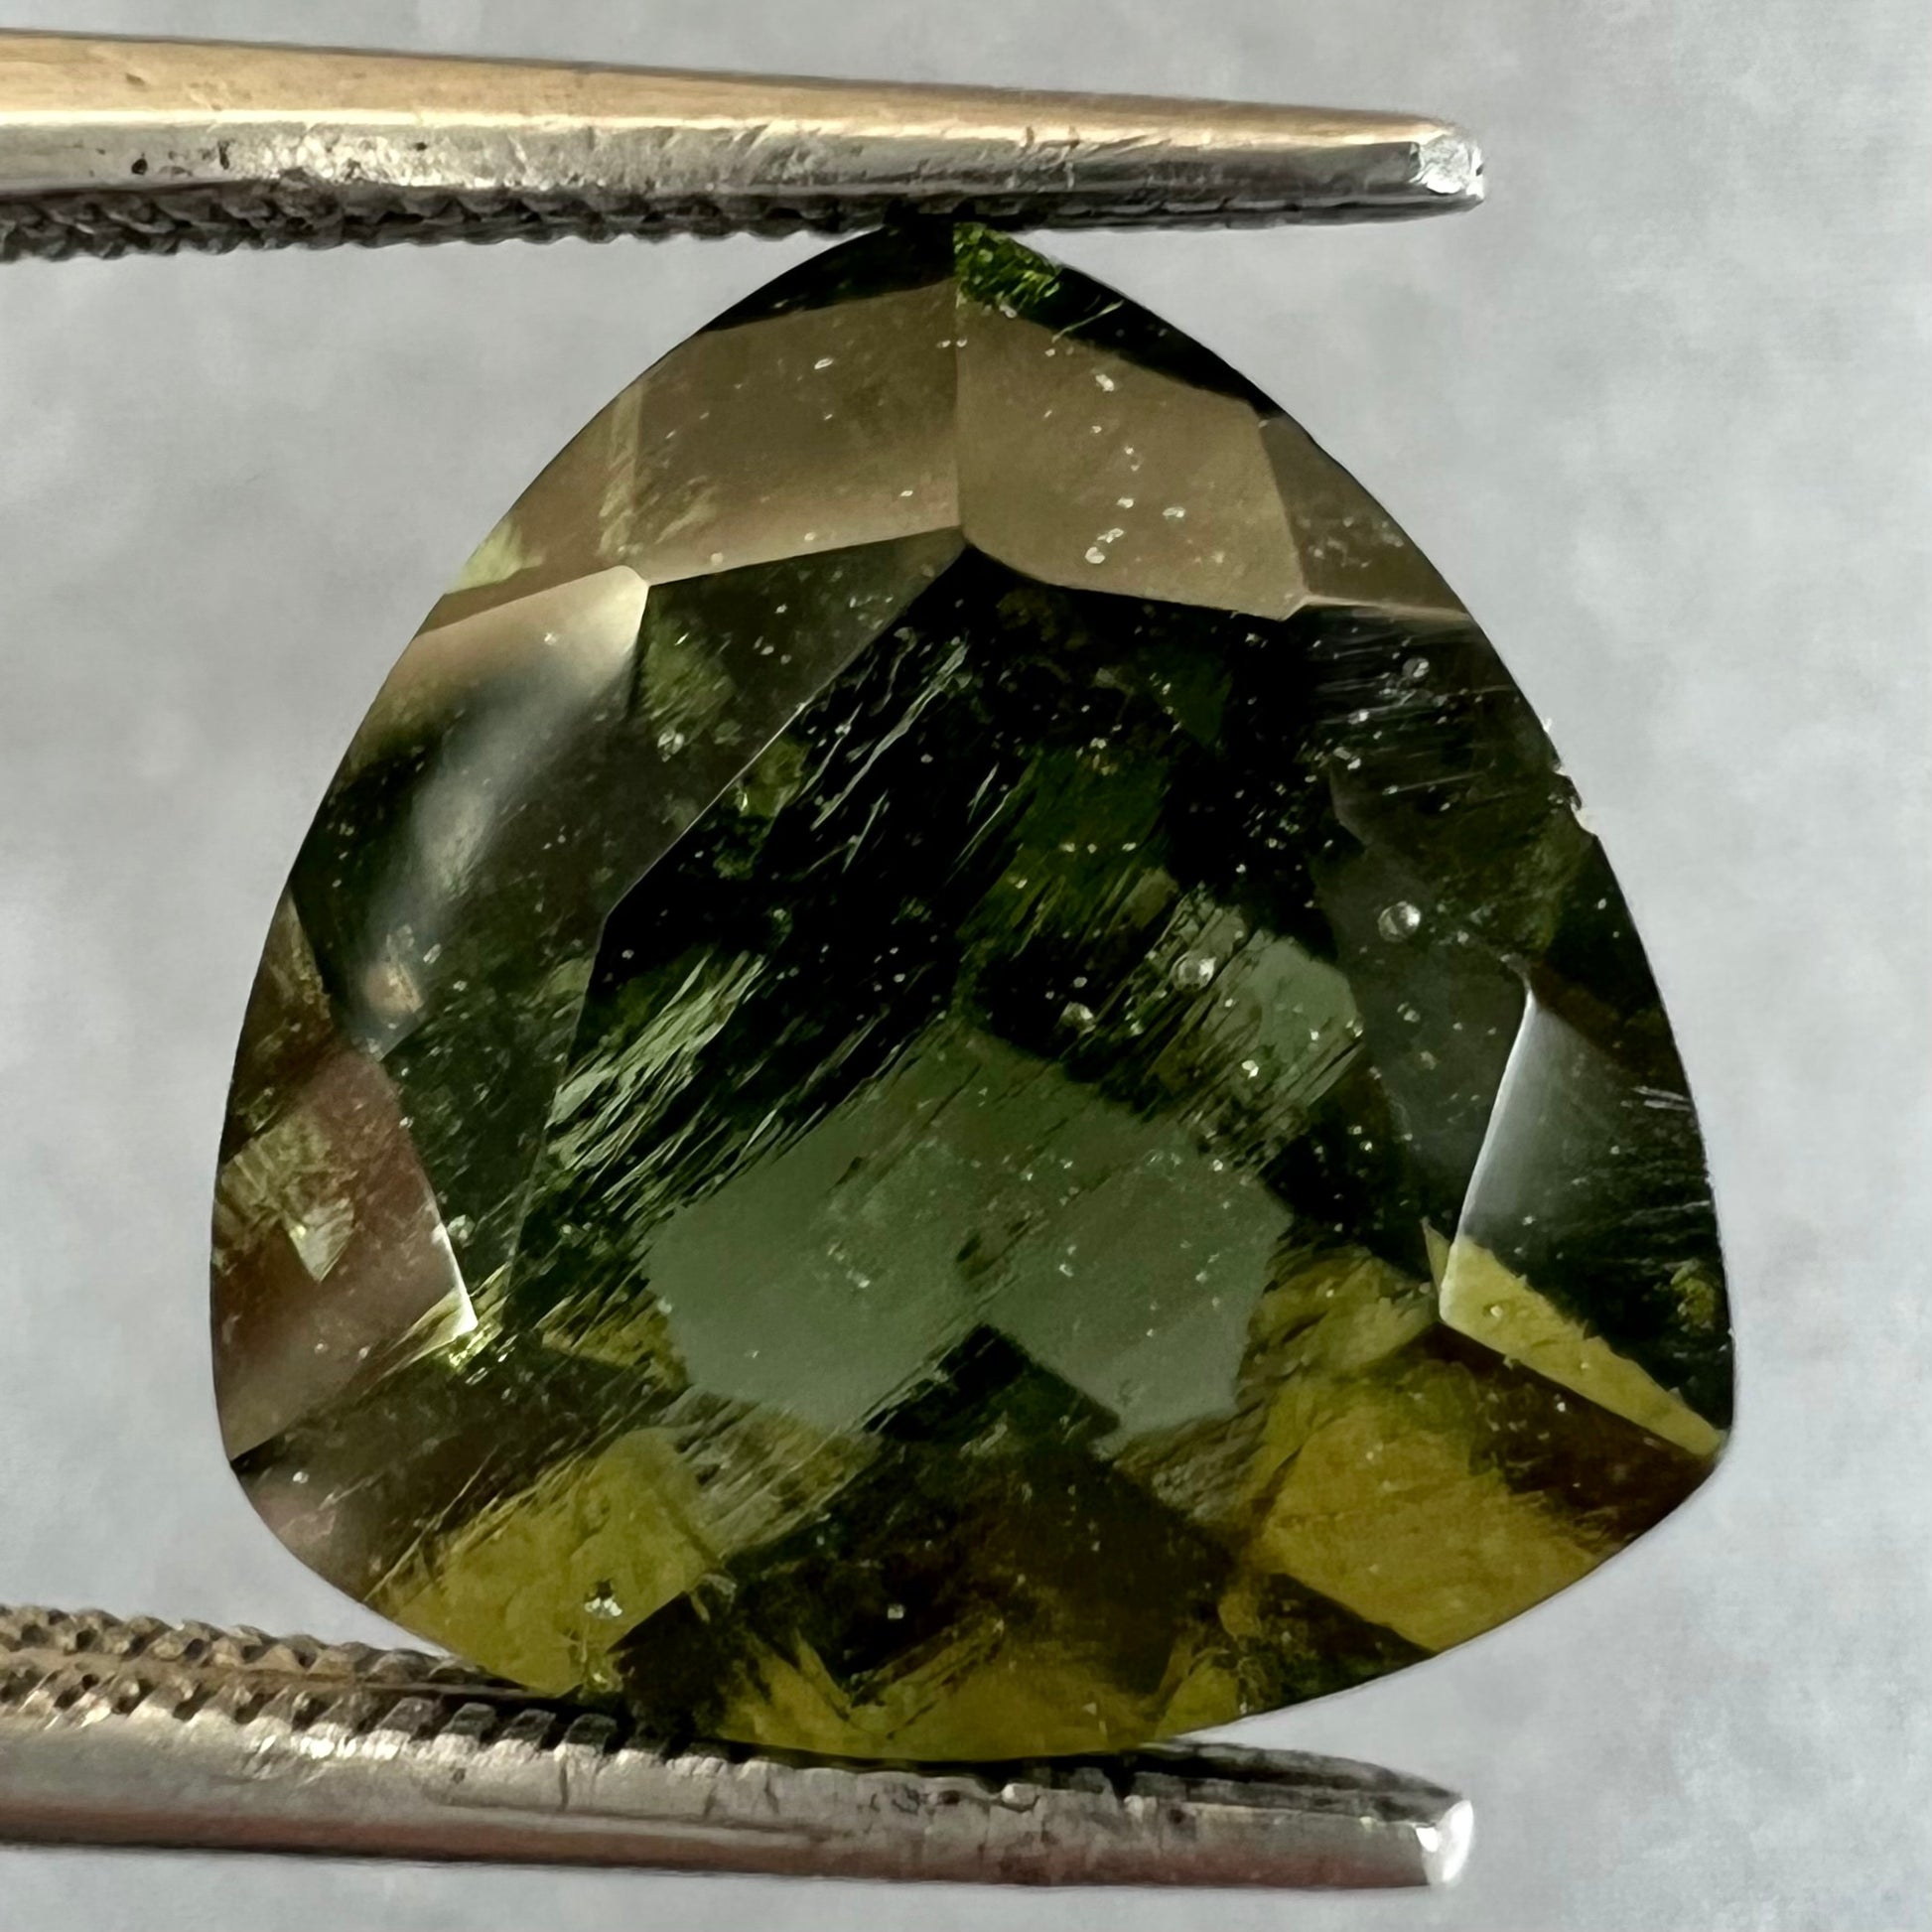 A loose, faceted trillion cut moldavite stone that weighs 2.73 carats.